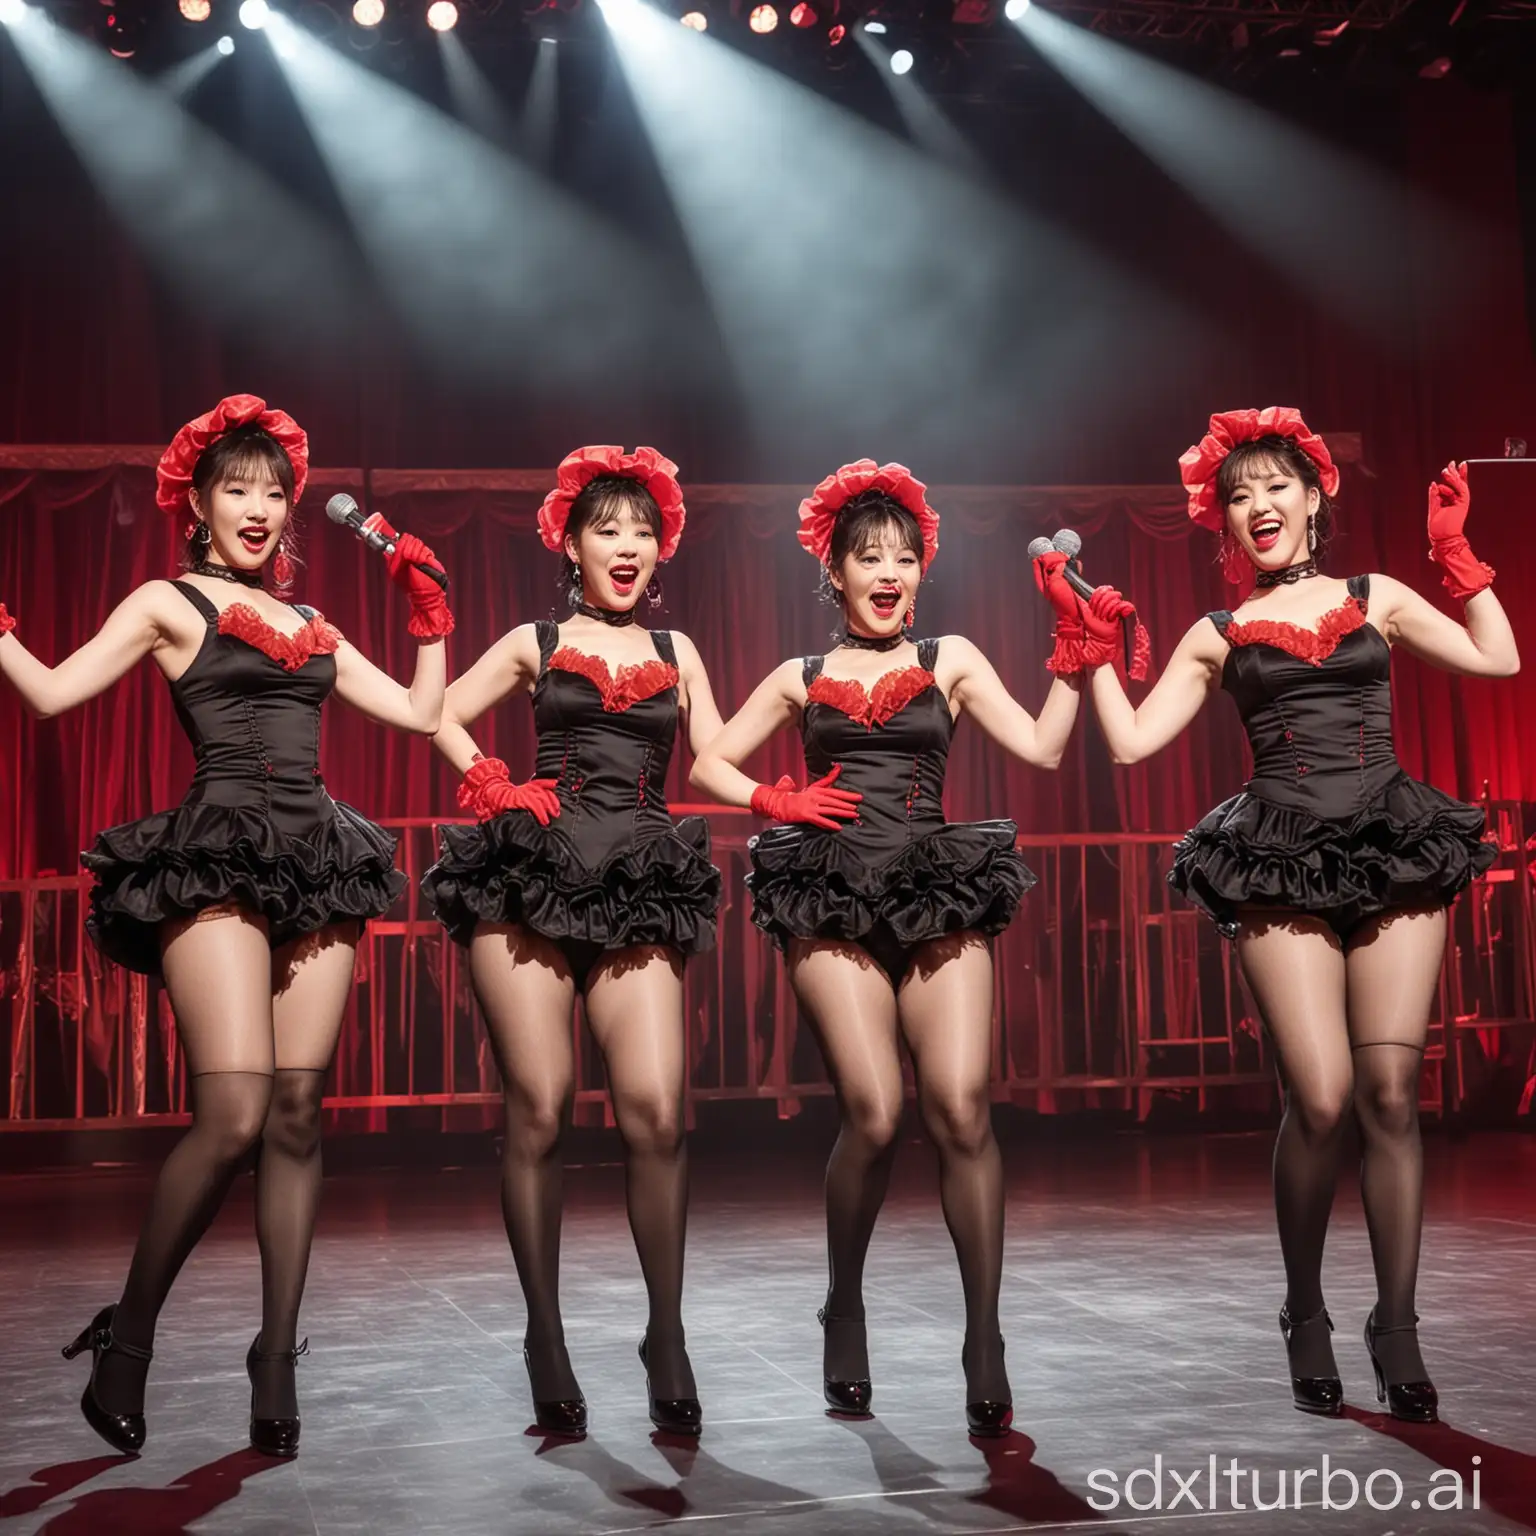 Female k pop group dressed as can can dancers with red gloves and microphone in hand singing together on stage and people filming